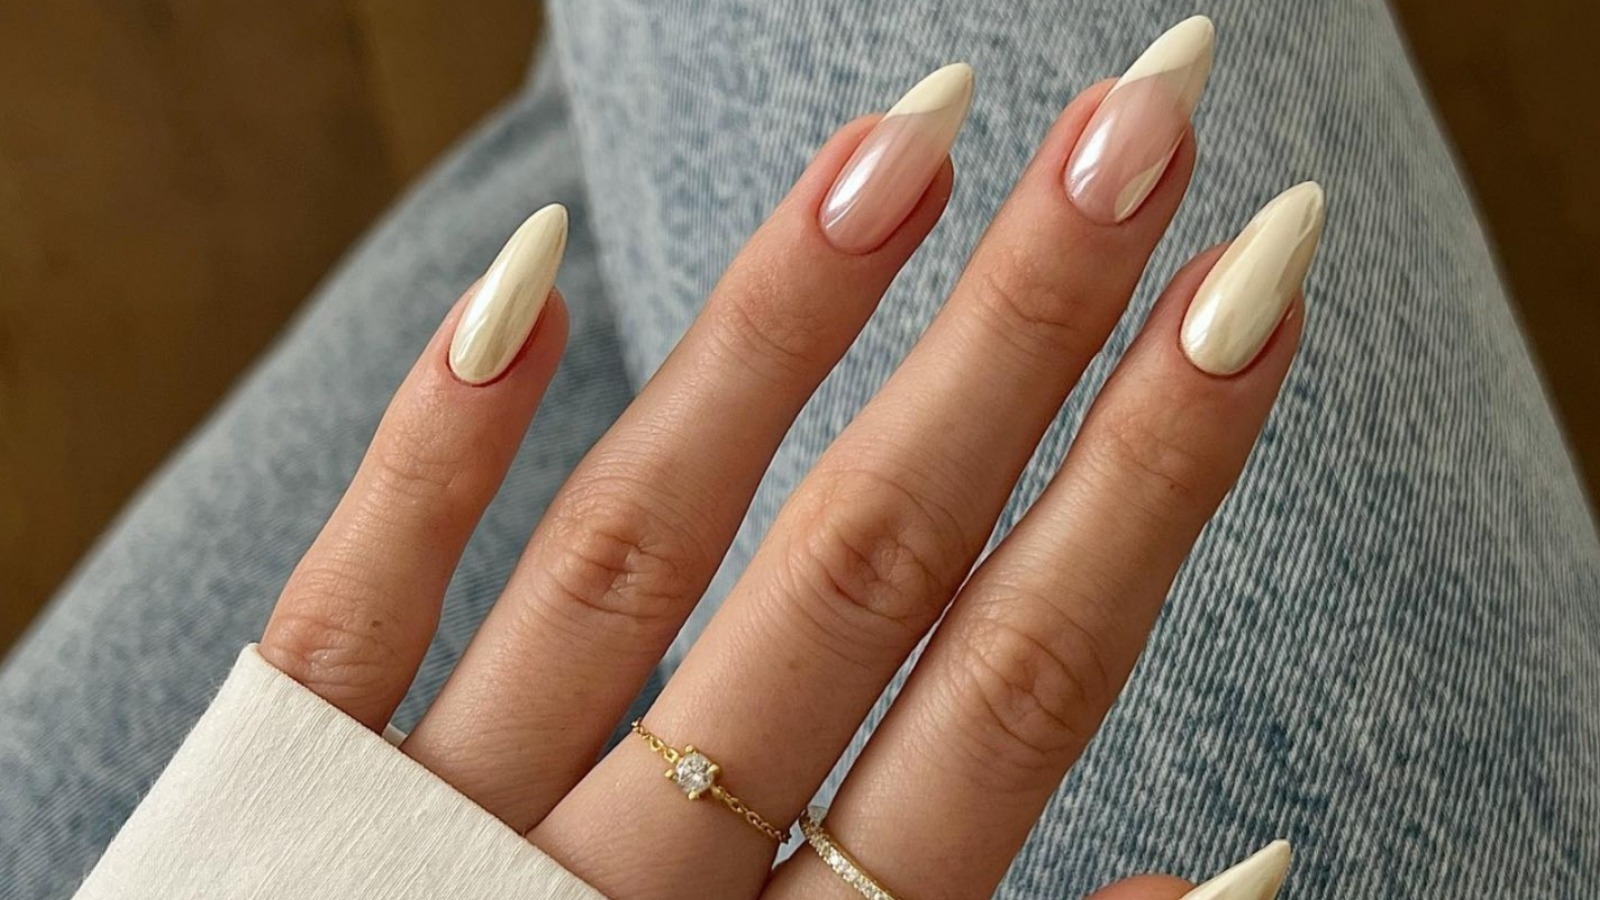 Vanilla Chrome The SwoonWorthy Nail Trend You'll Want As Your Next